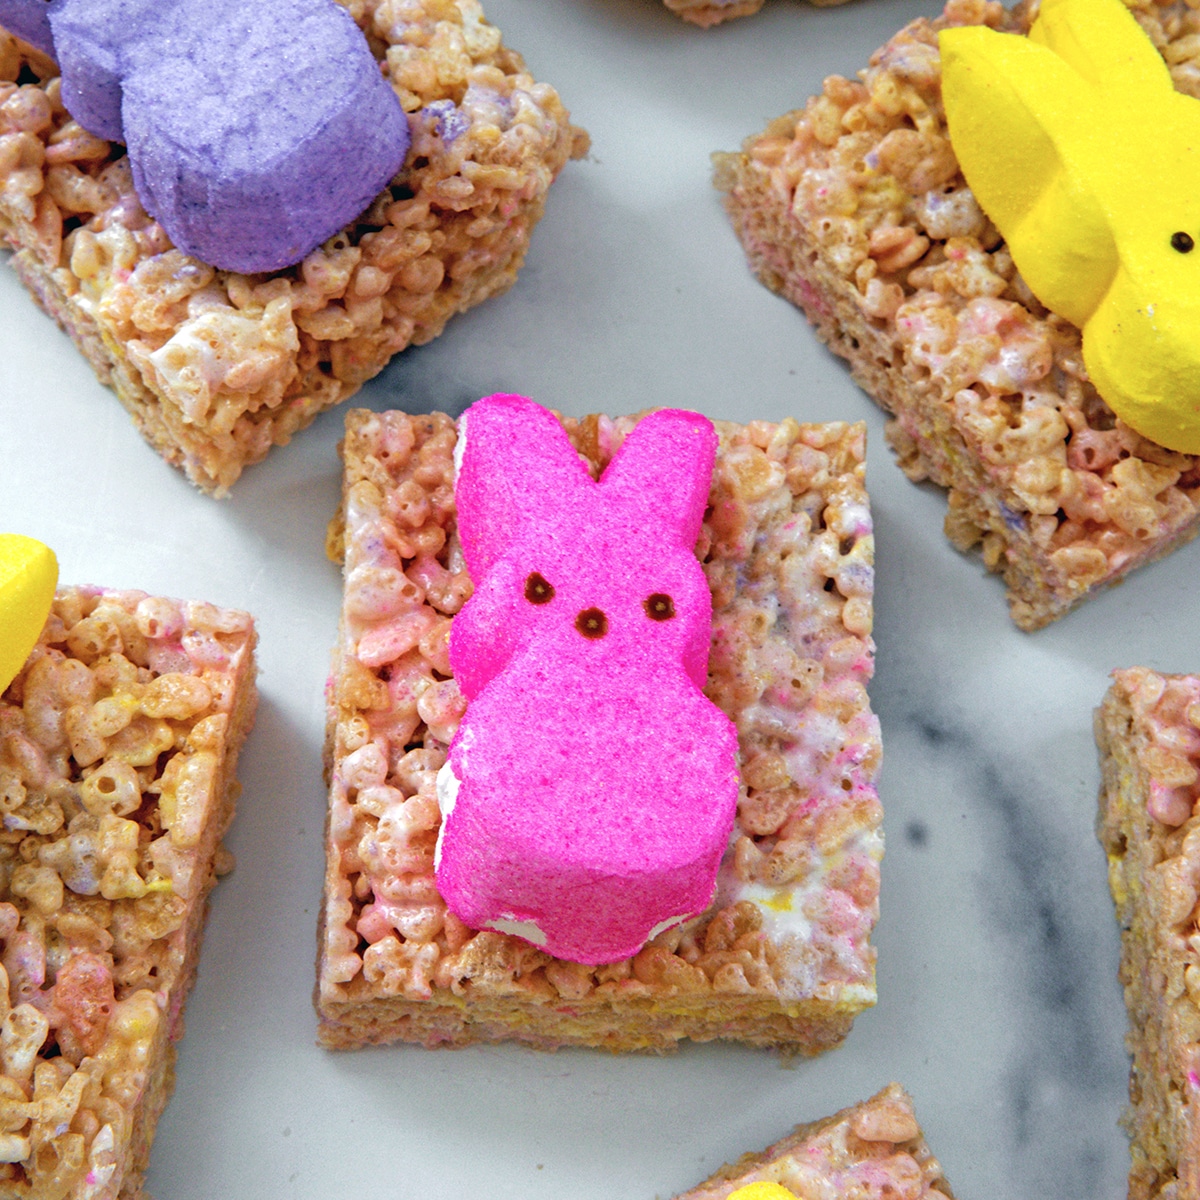 Overhead closeup view of a colorful Rice Krispies treat with pink Peeps bunny on top.